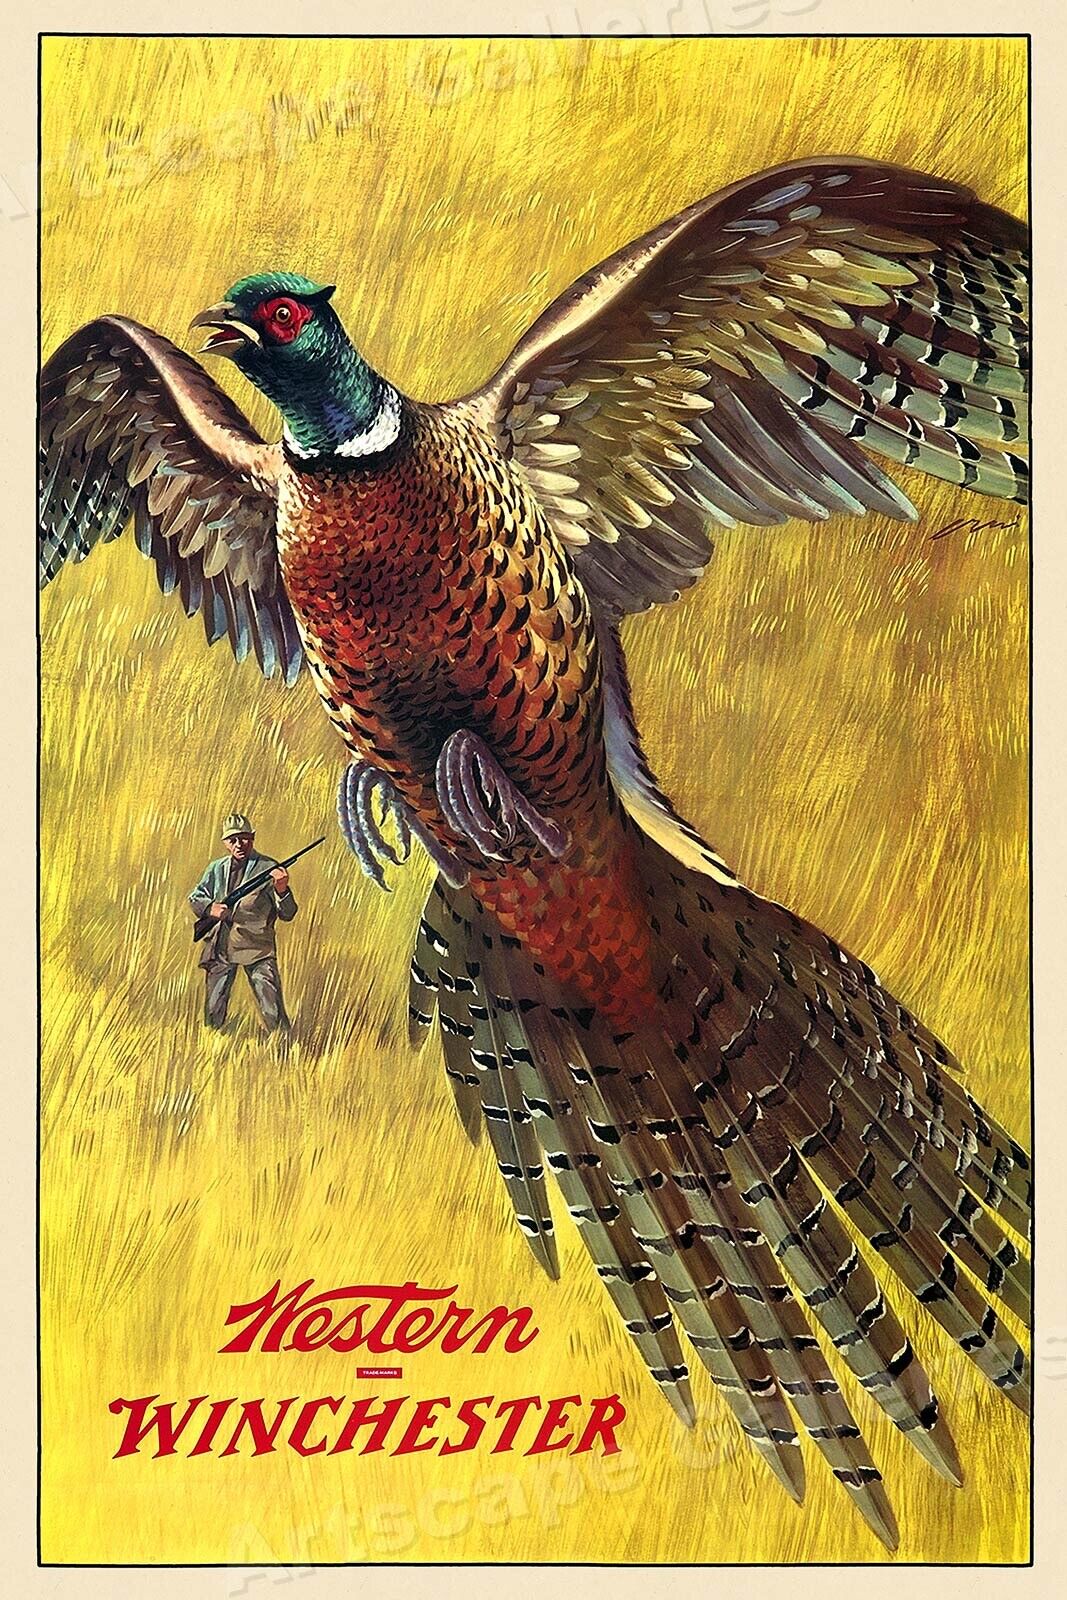 1955 Winchester Vintage Style Pheasant Hunting Poster - 20x30